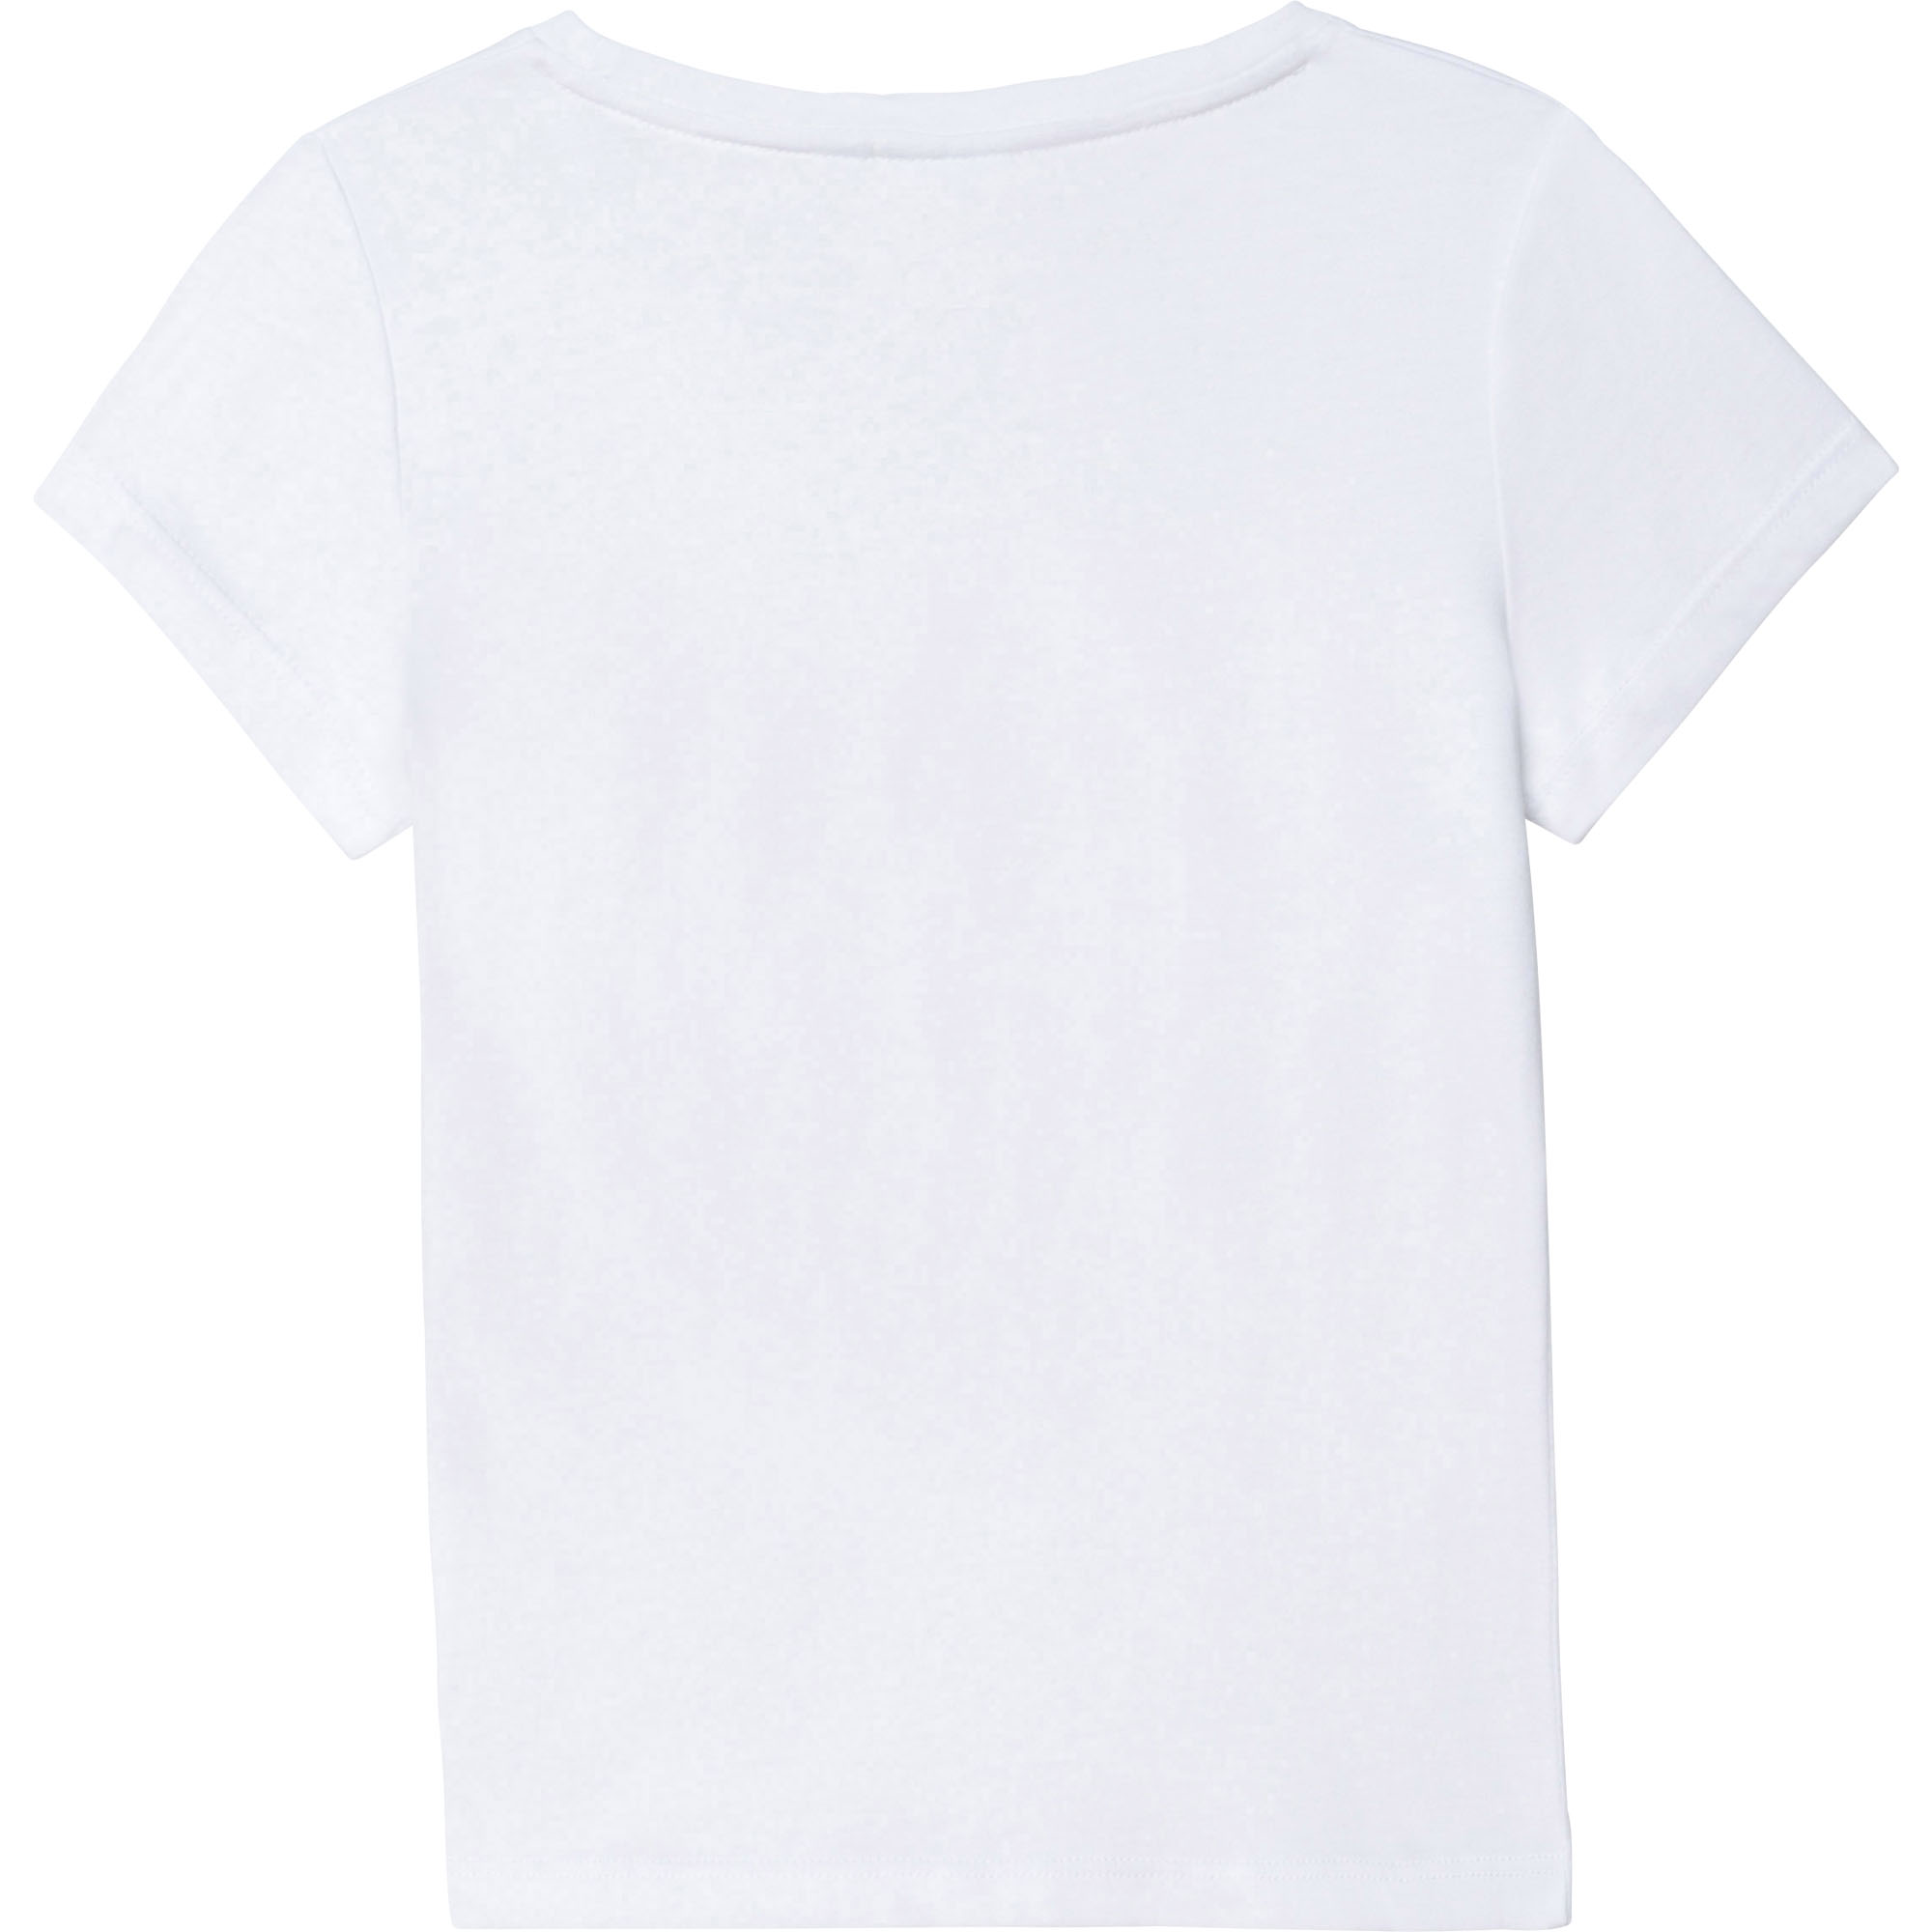 Cotton and modal T-shirt BOSS for GIRL